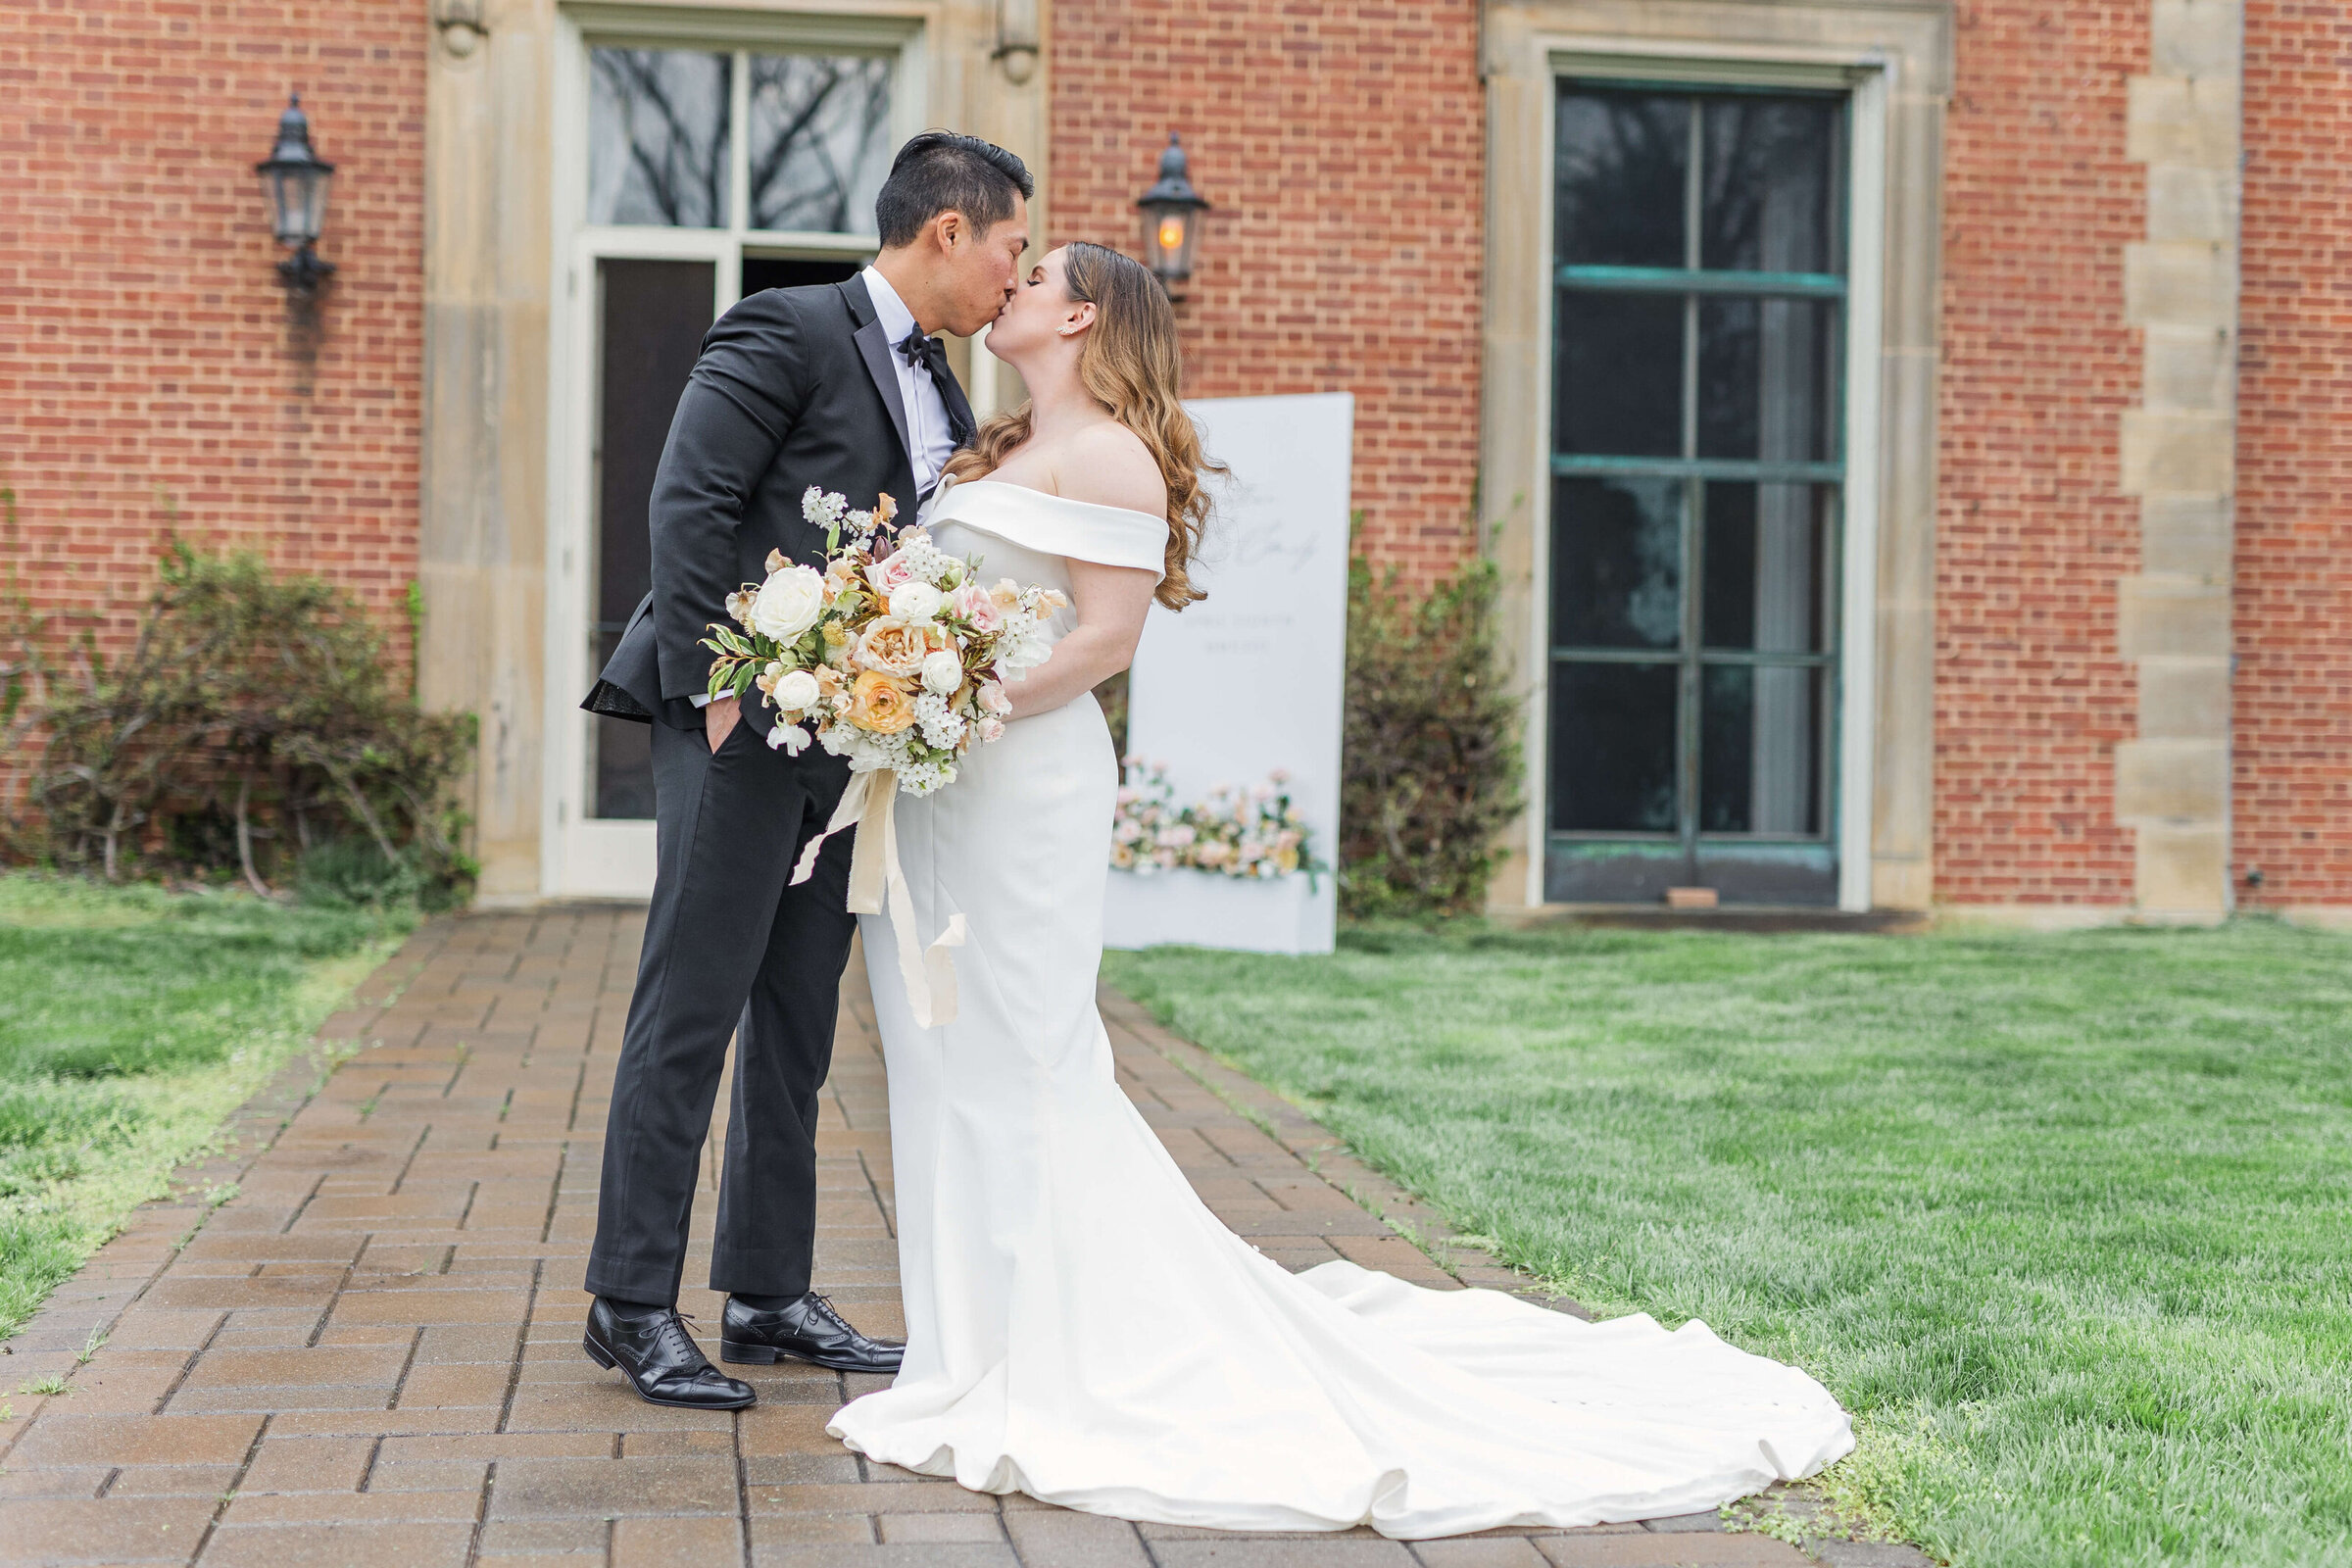 A bride and groom kiss on the grass at Peterloon Estates